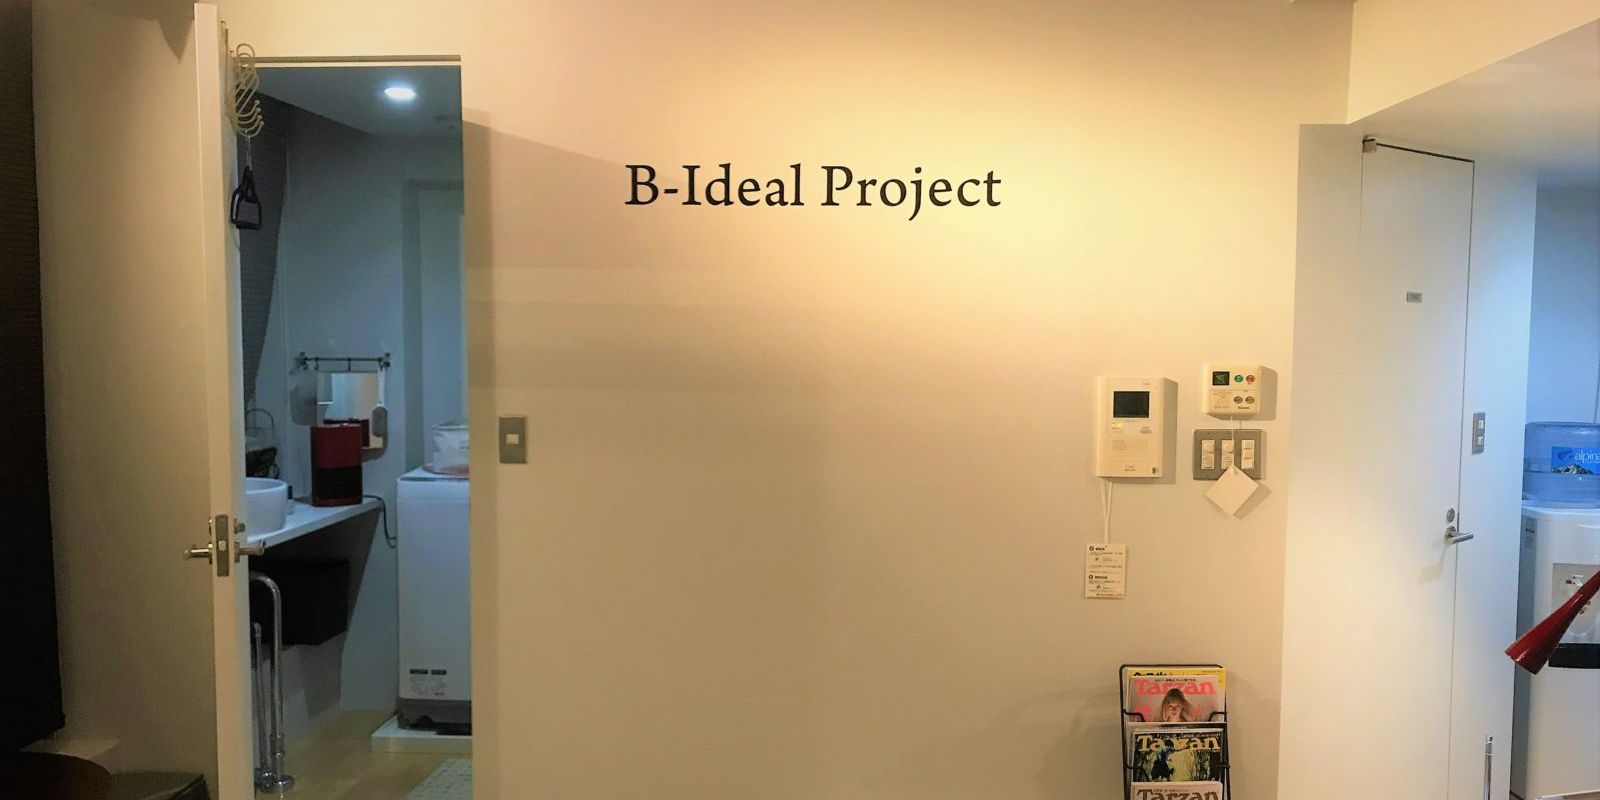 B-Ideal Project